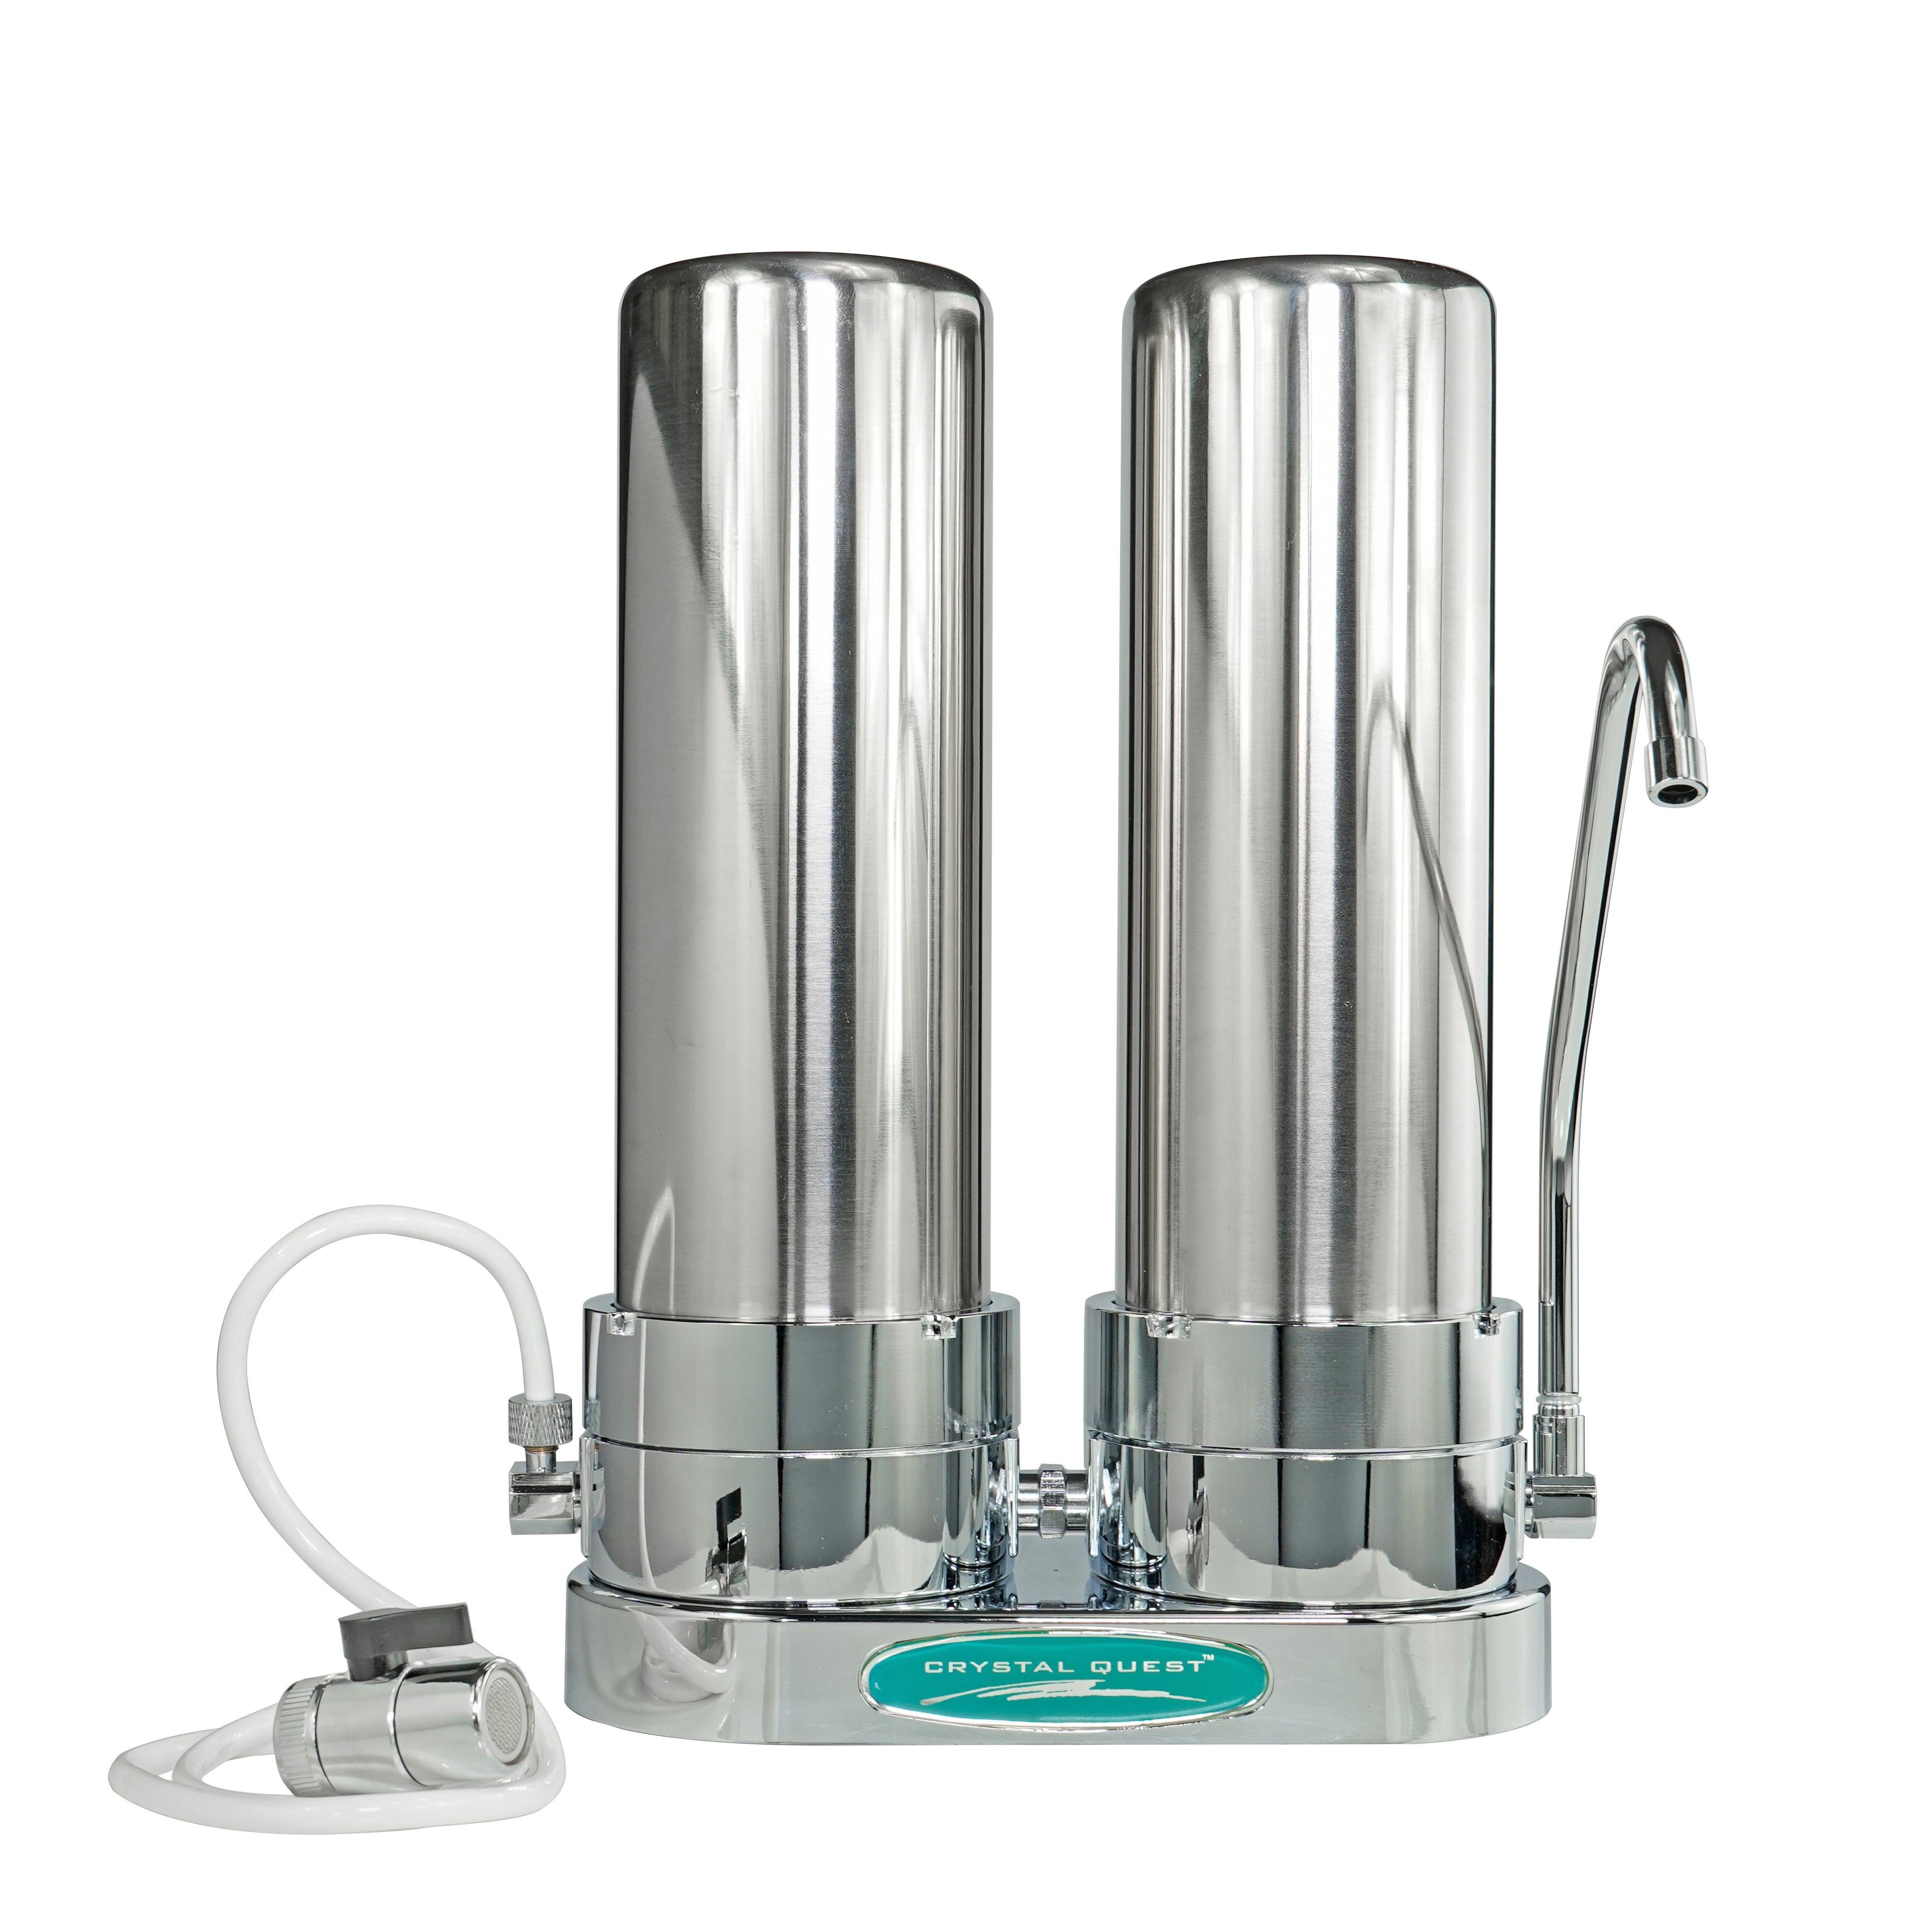 Double / Stainless Steel Nitrate Countertop Water Filter System - Countertop Water Filters - Crystal Quest